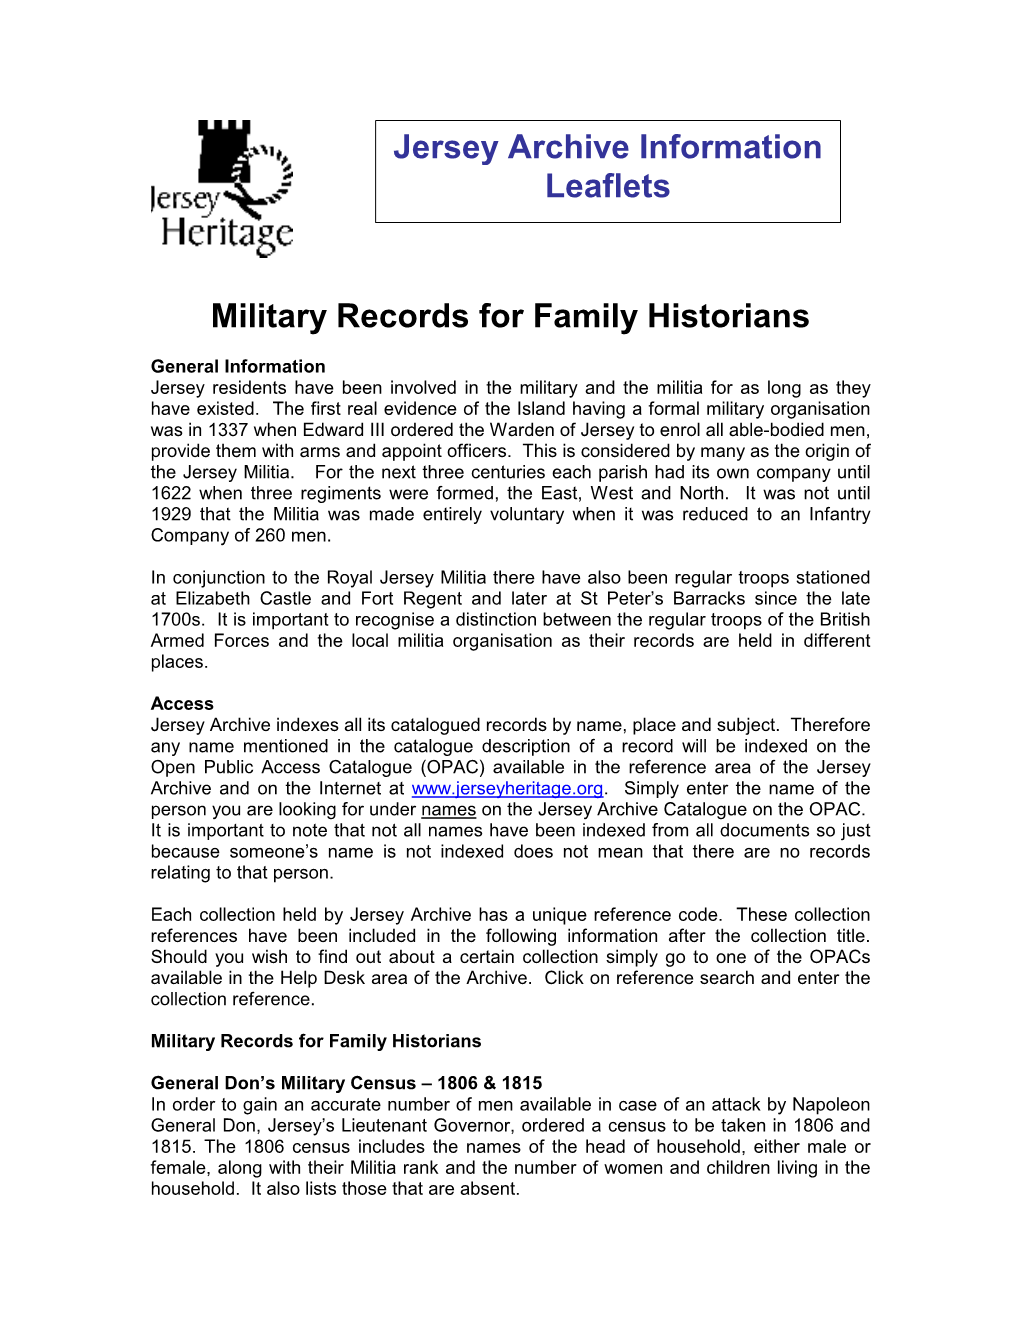 Military Records for Family Historians Jersey Archive Information Leaflets